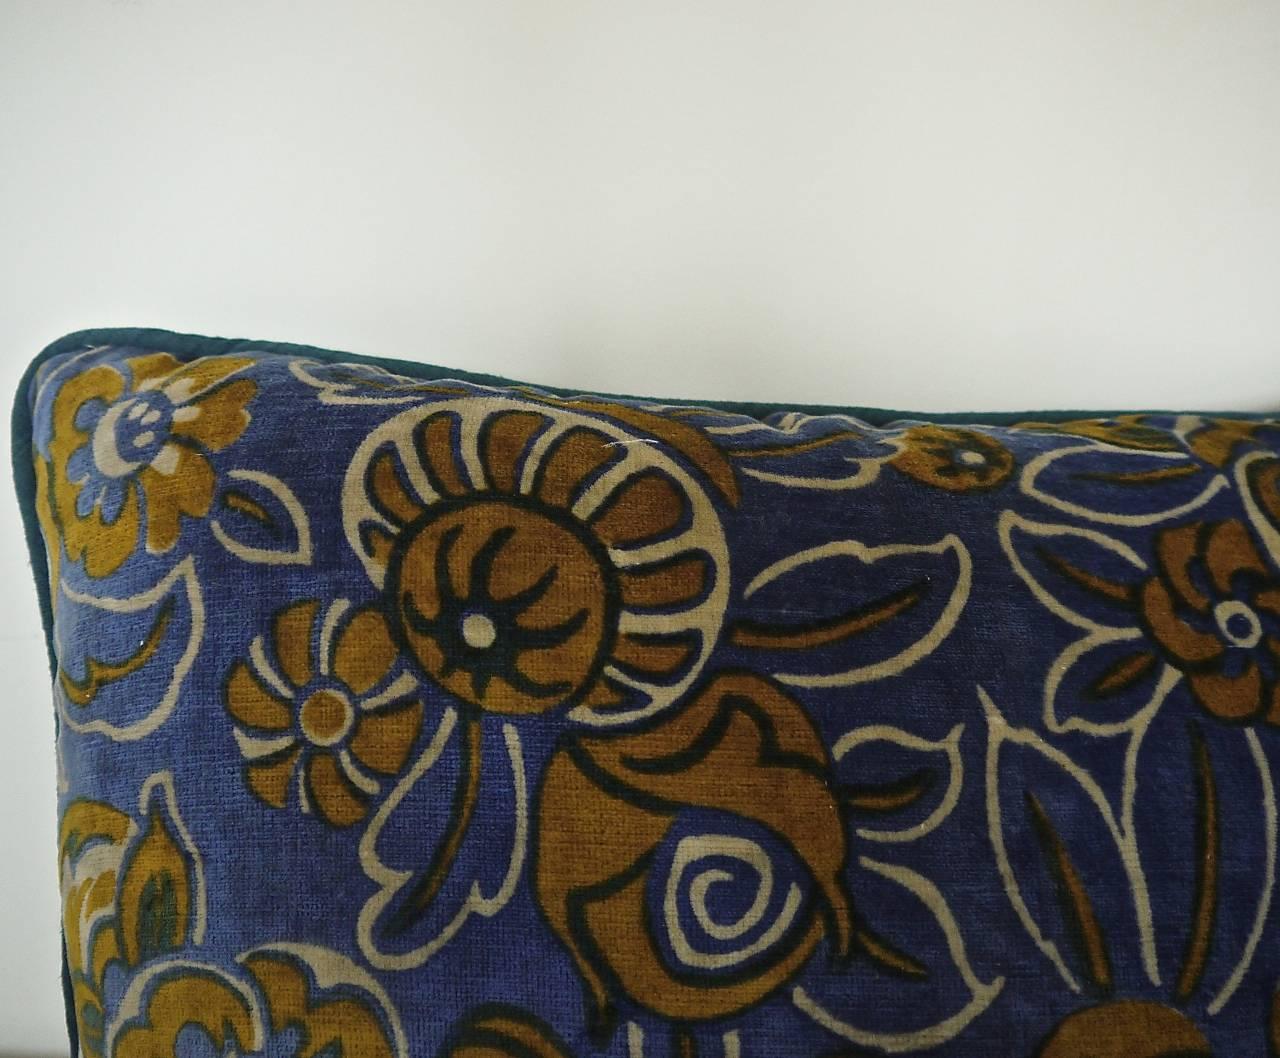 French 1920s Art Deco Tan and Blue Floral Velvet Cushion For Sale 1